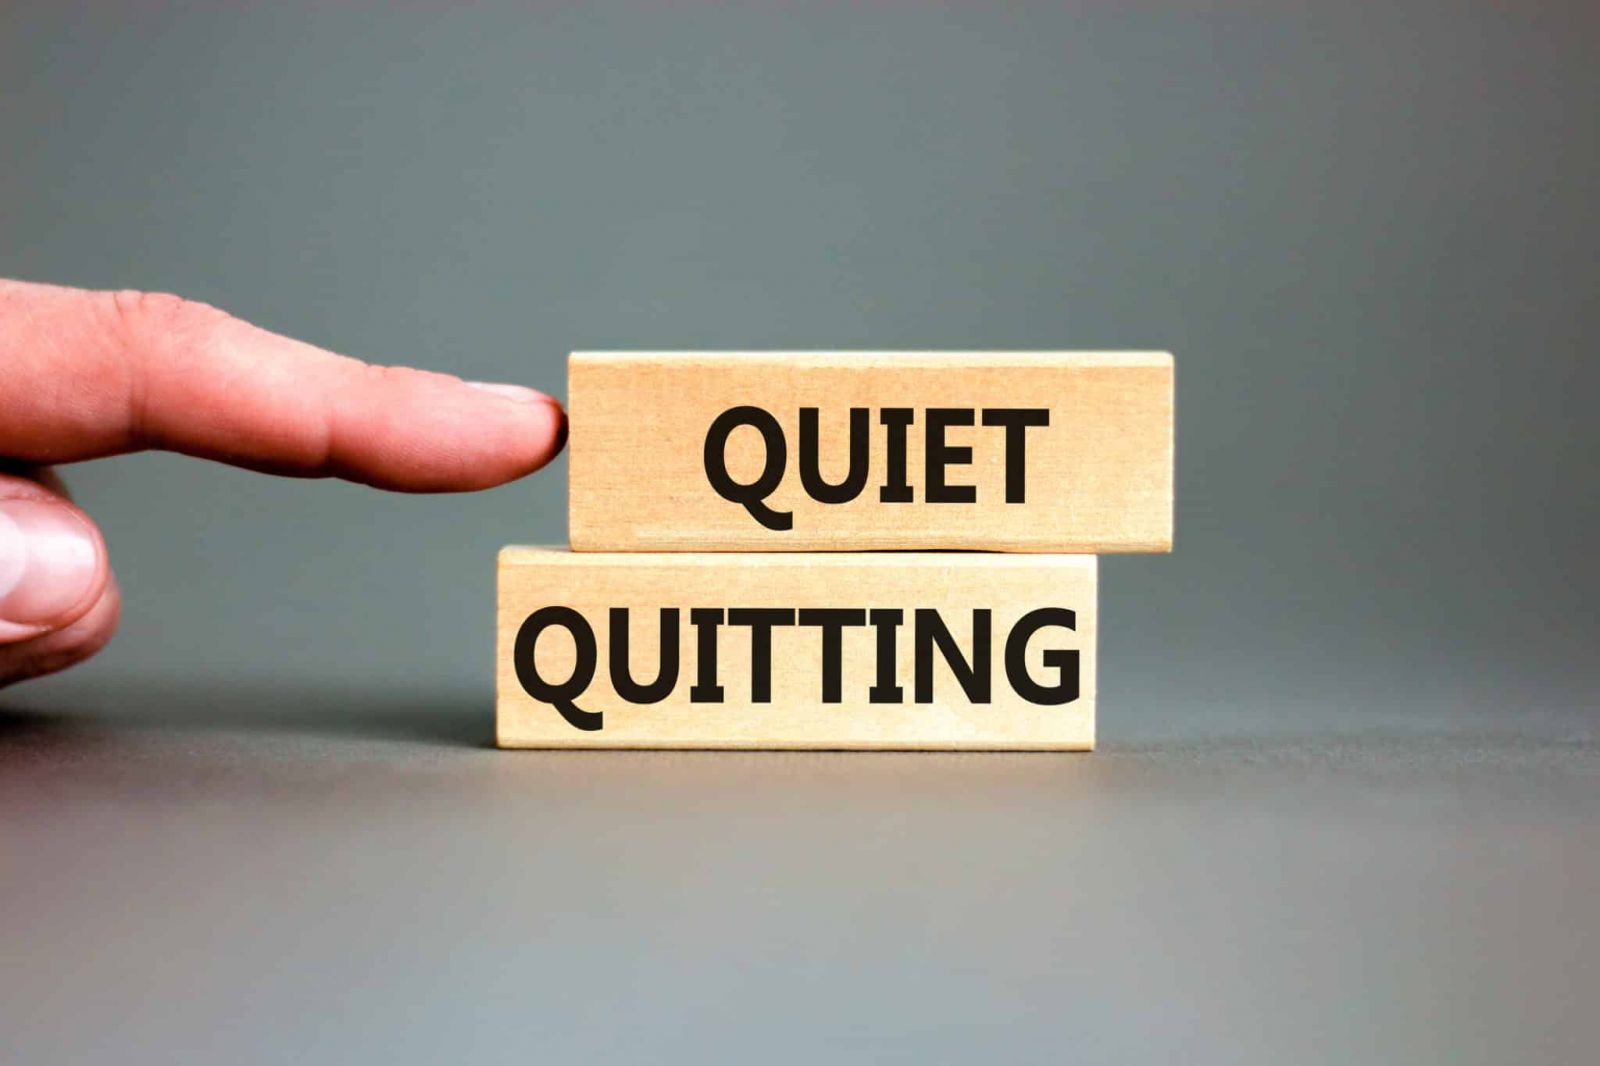 ‘Quiet Quitting’ Explained: Here’s What Recruiters Need to Know About This Buzzword